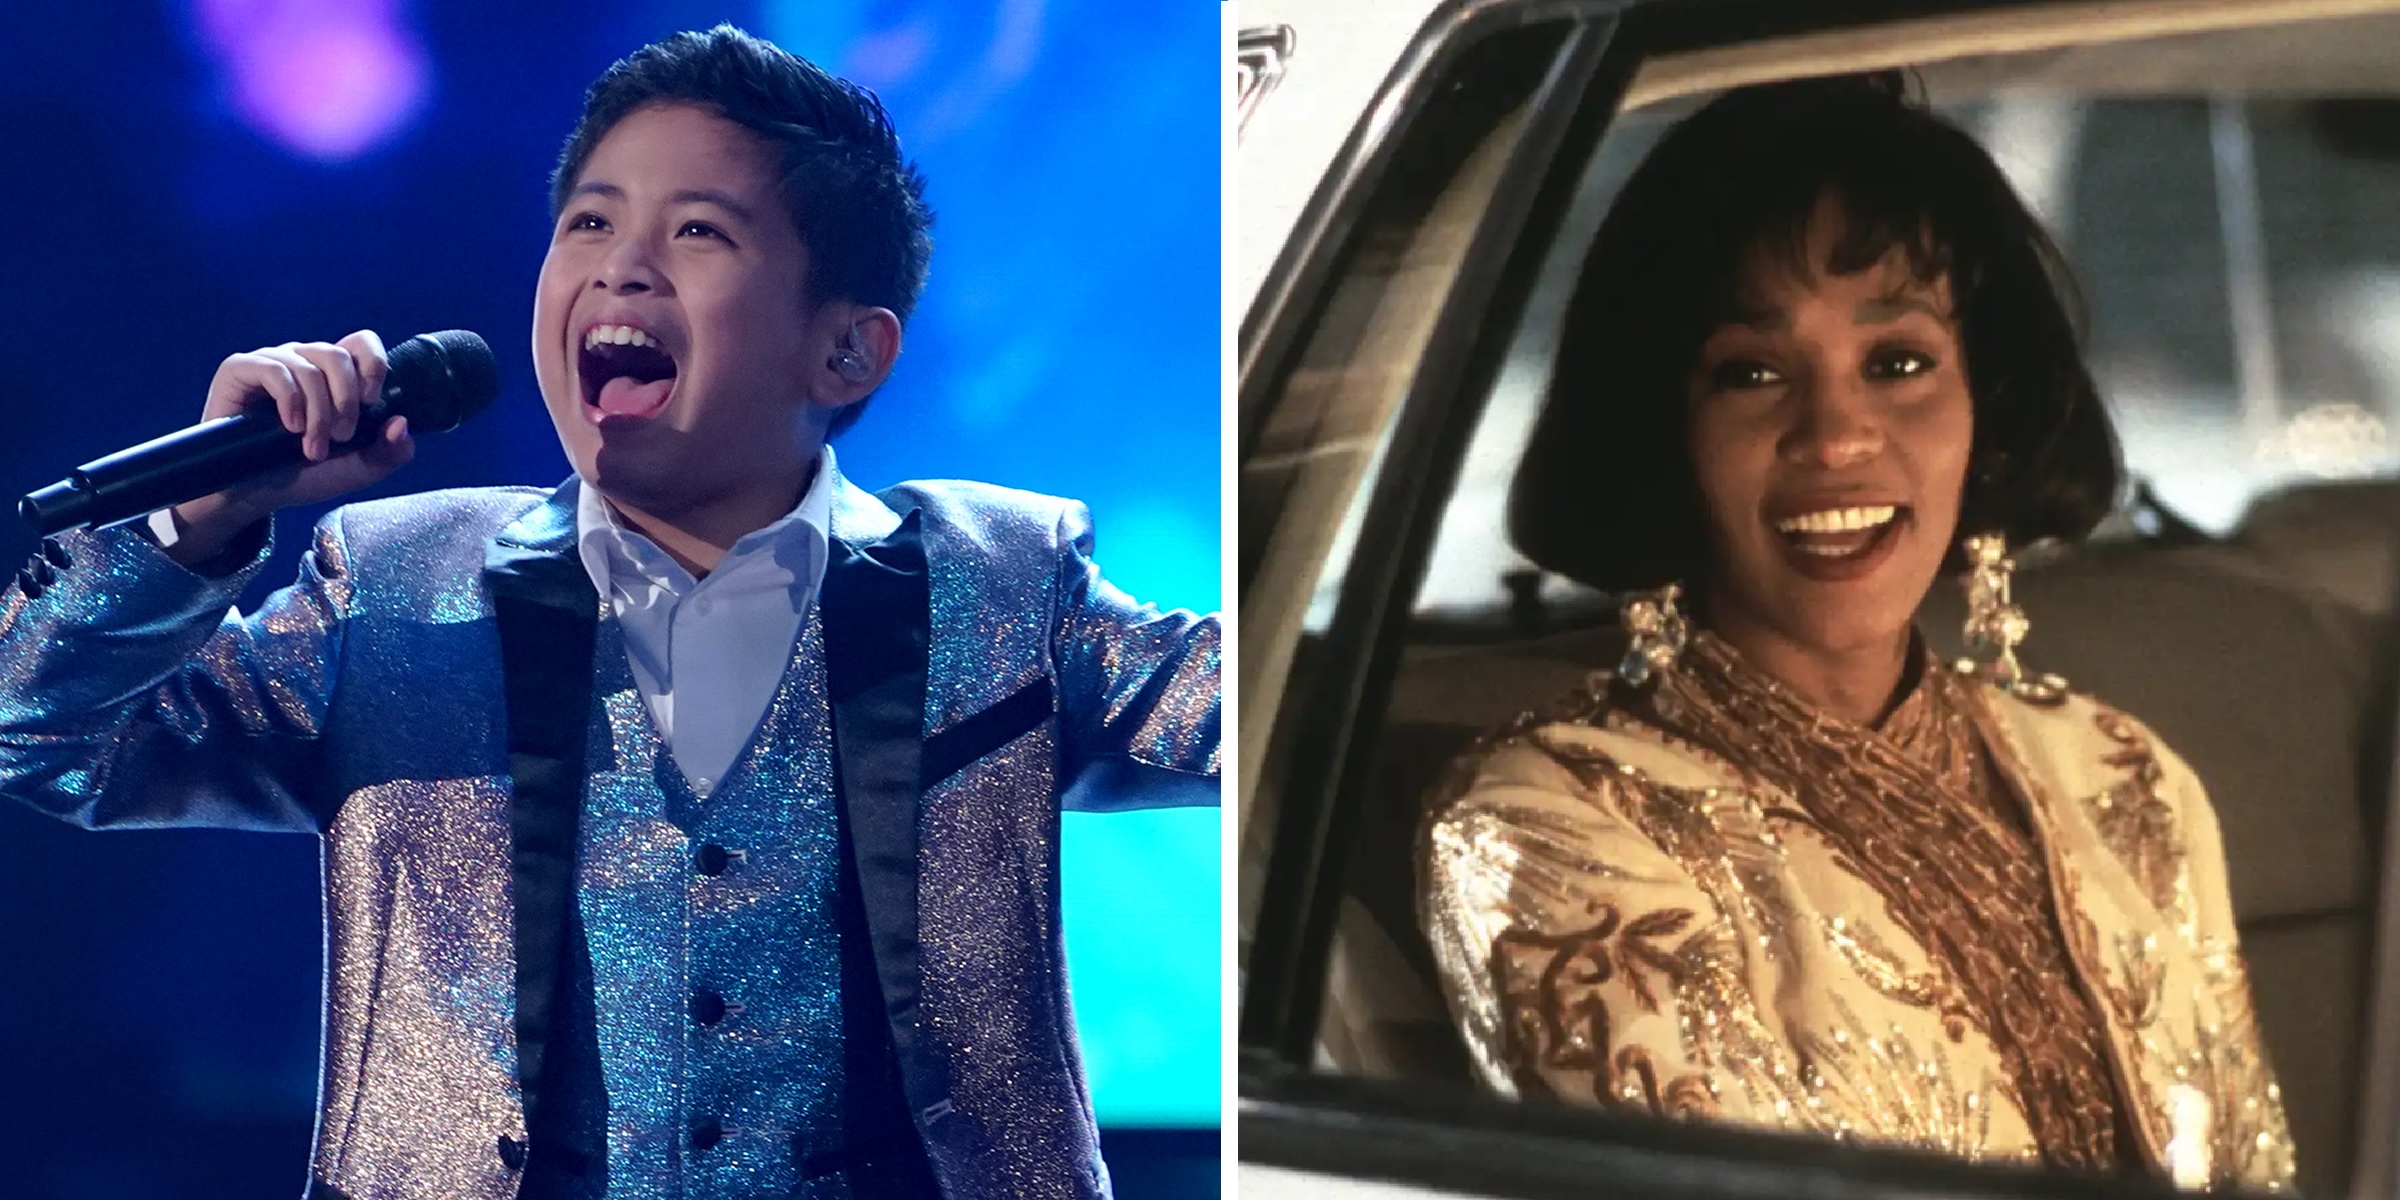 10 Year Old Boy Sings Whitney Houston Classic On America’s Got Talent and Absolutely Nails It